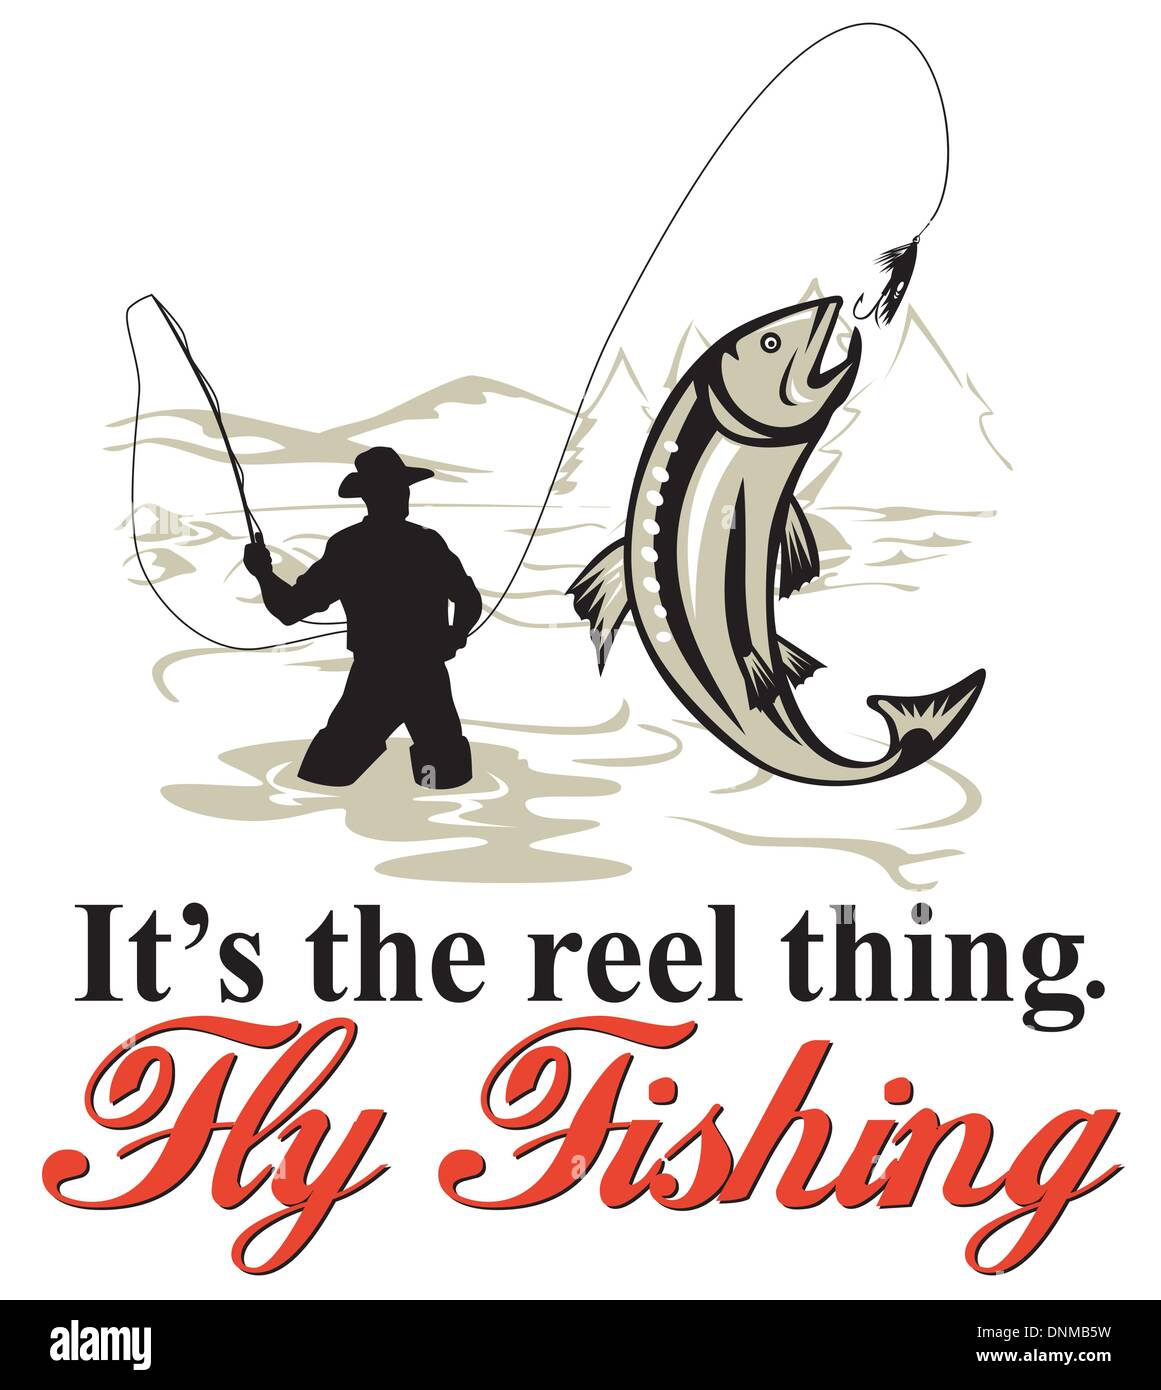 graphic design illustration of Fly fisherman catching trout with